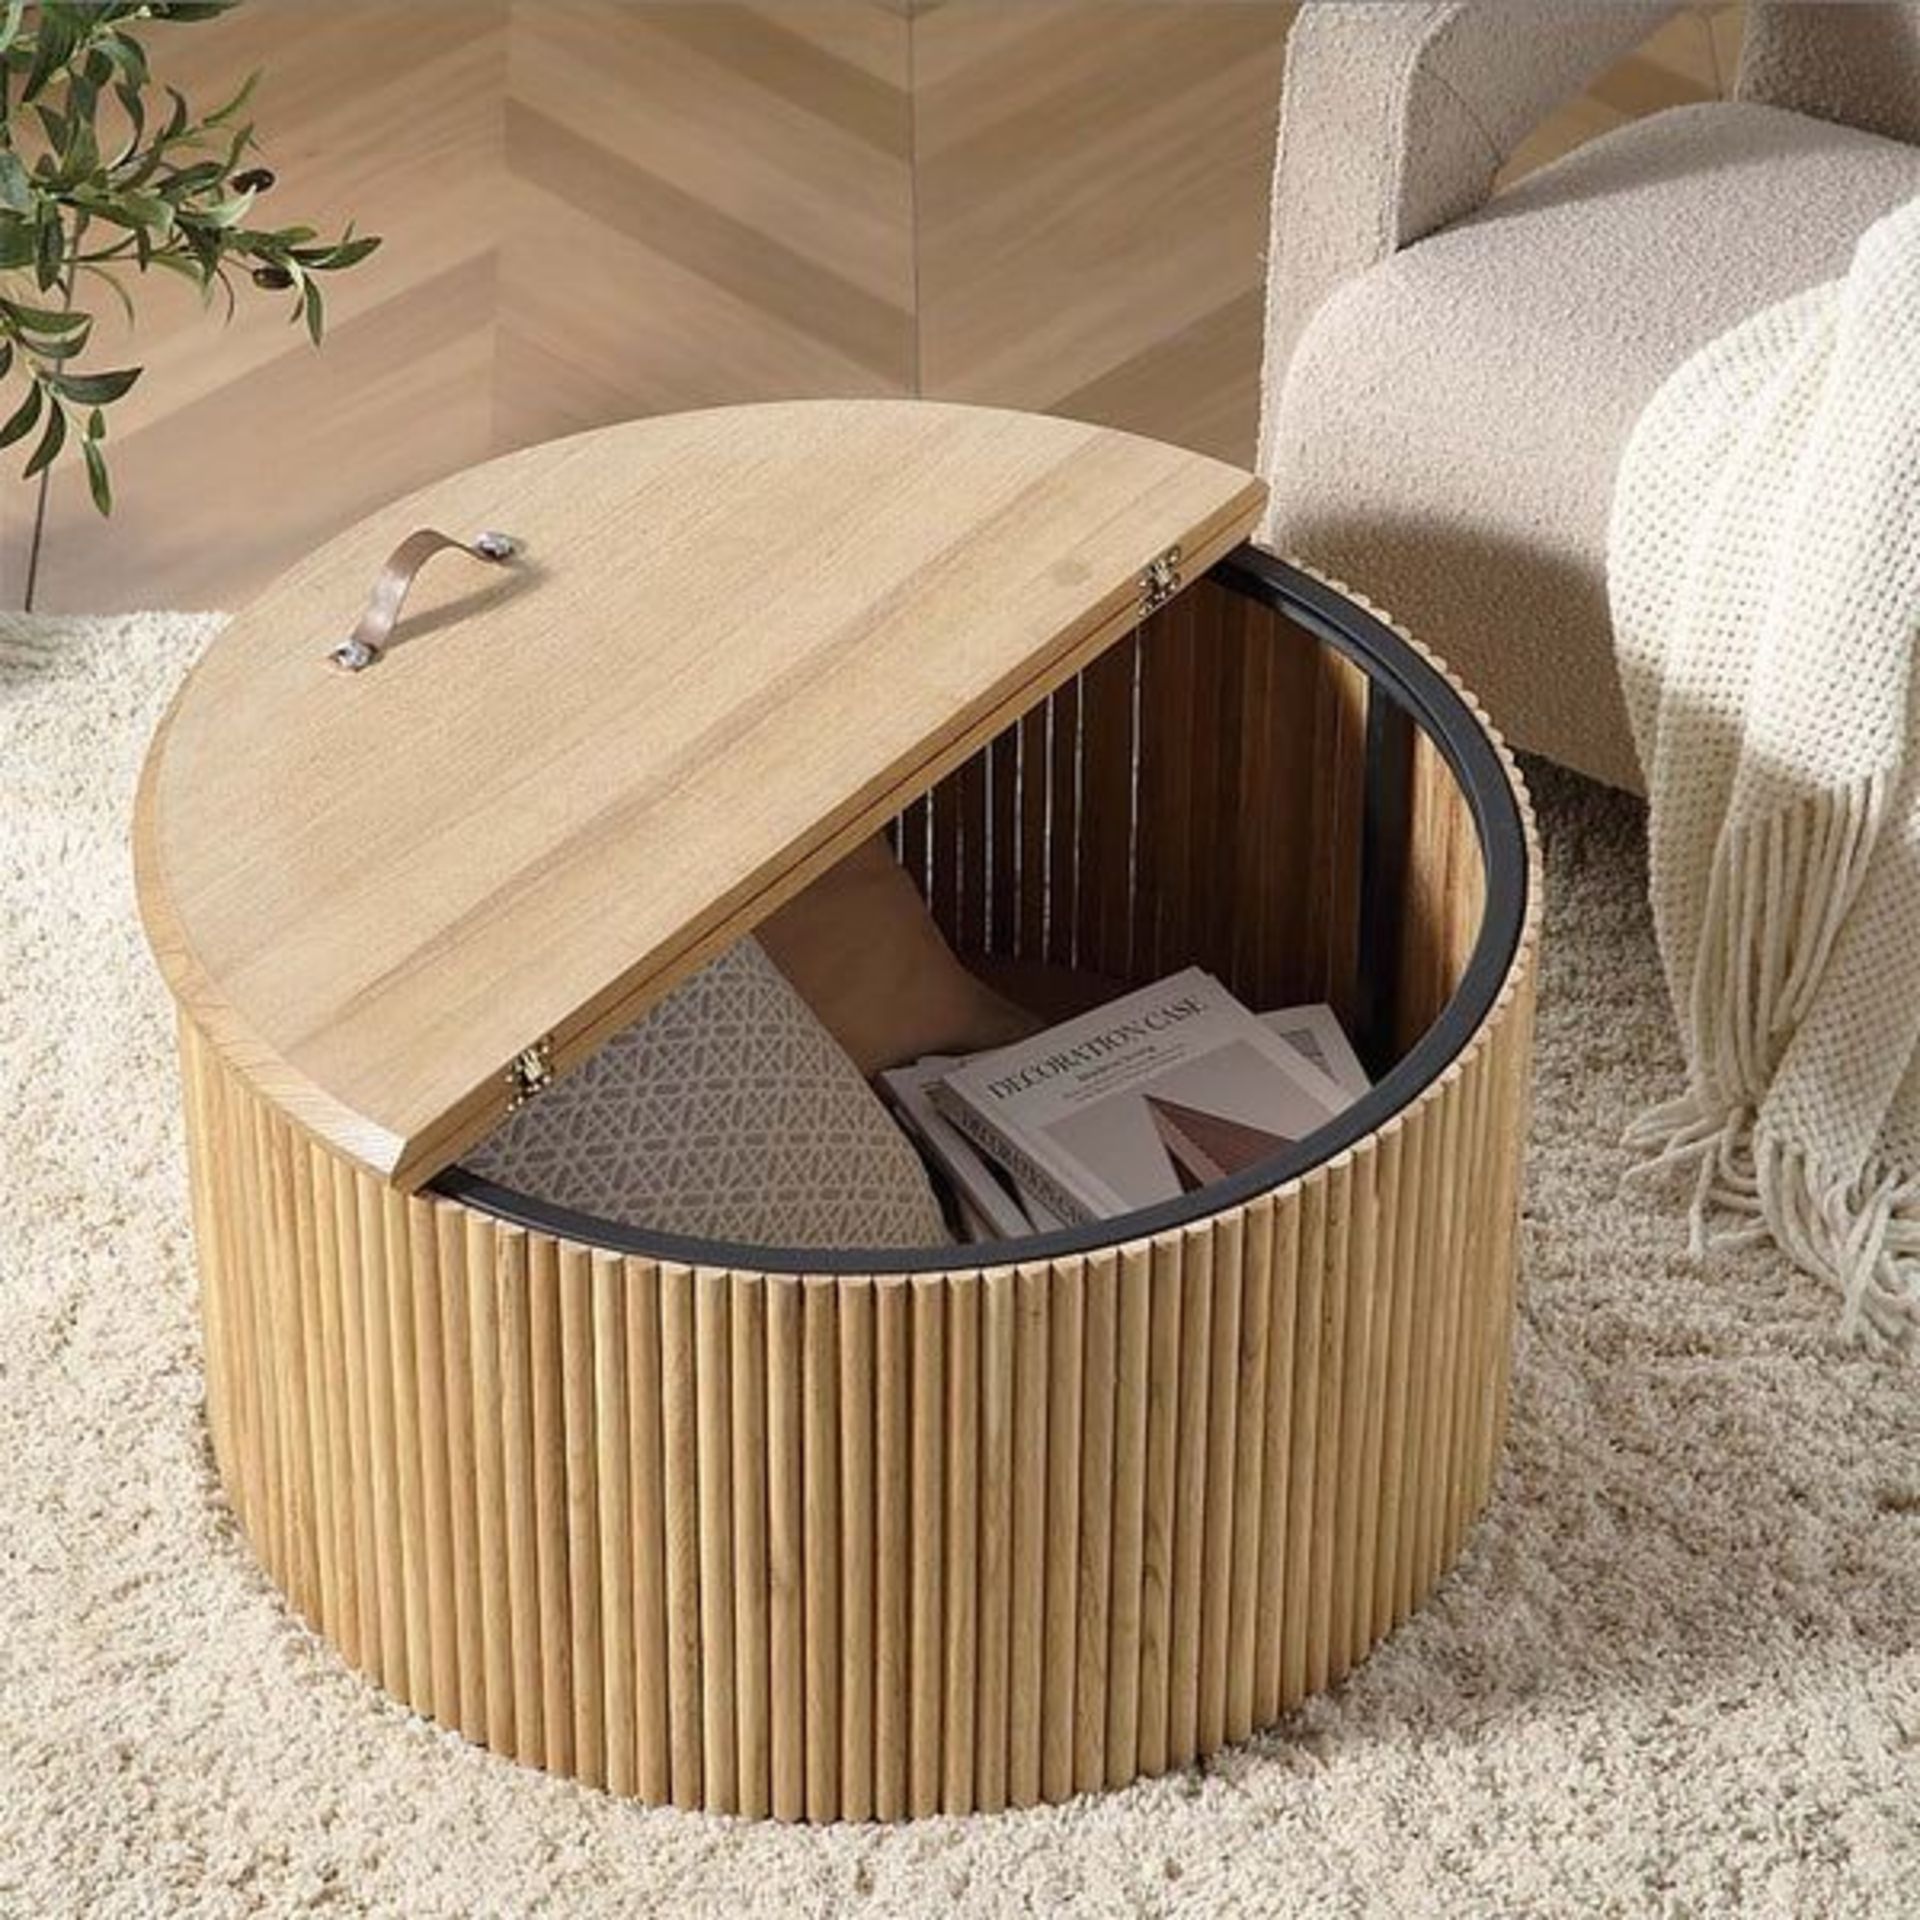 Maru Oak Round Coffee Table with Storage, Oak. - ER30. RRP £349.99. Featuring fluted base made - Image 2 of 2